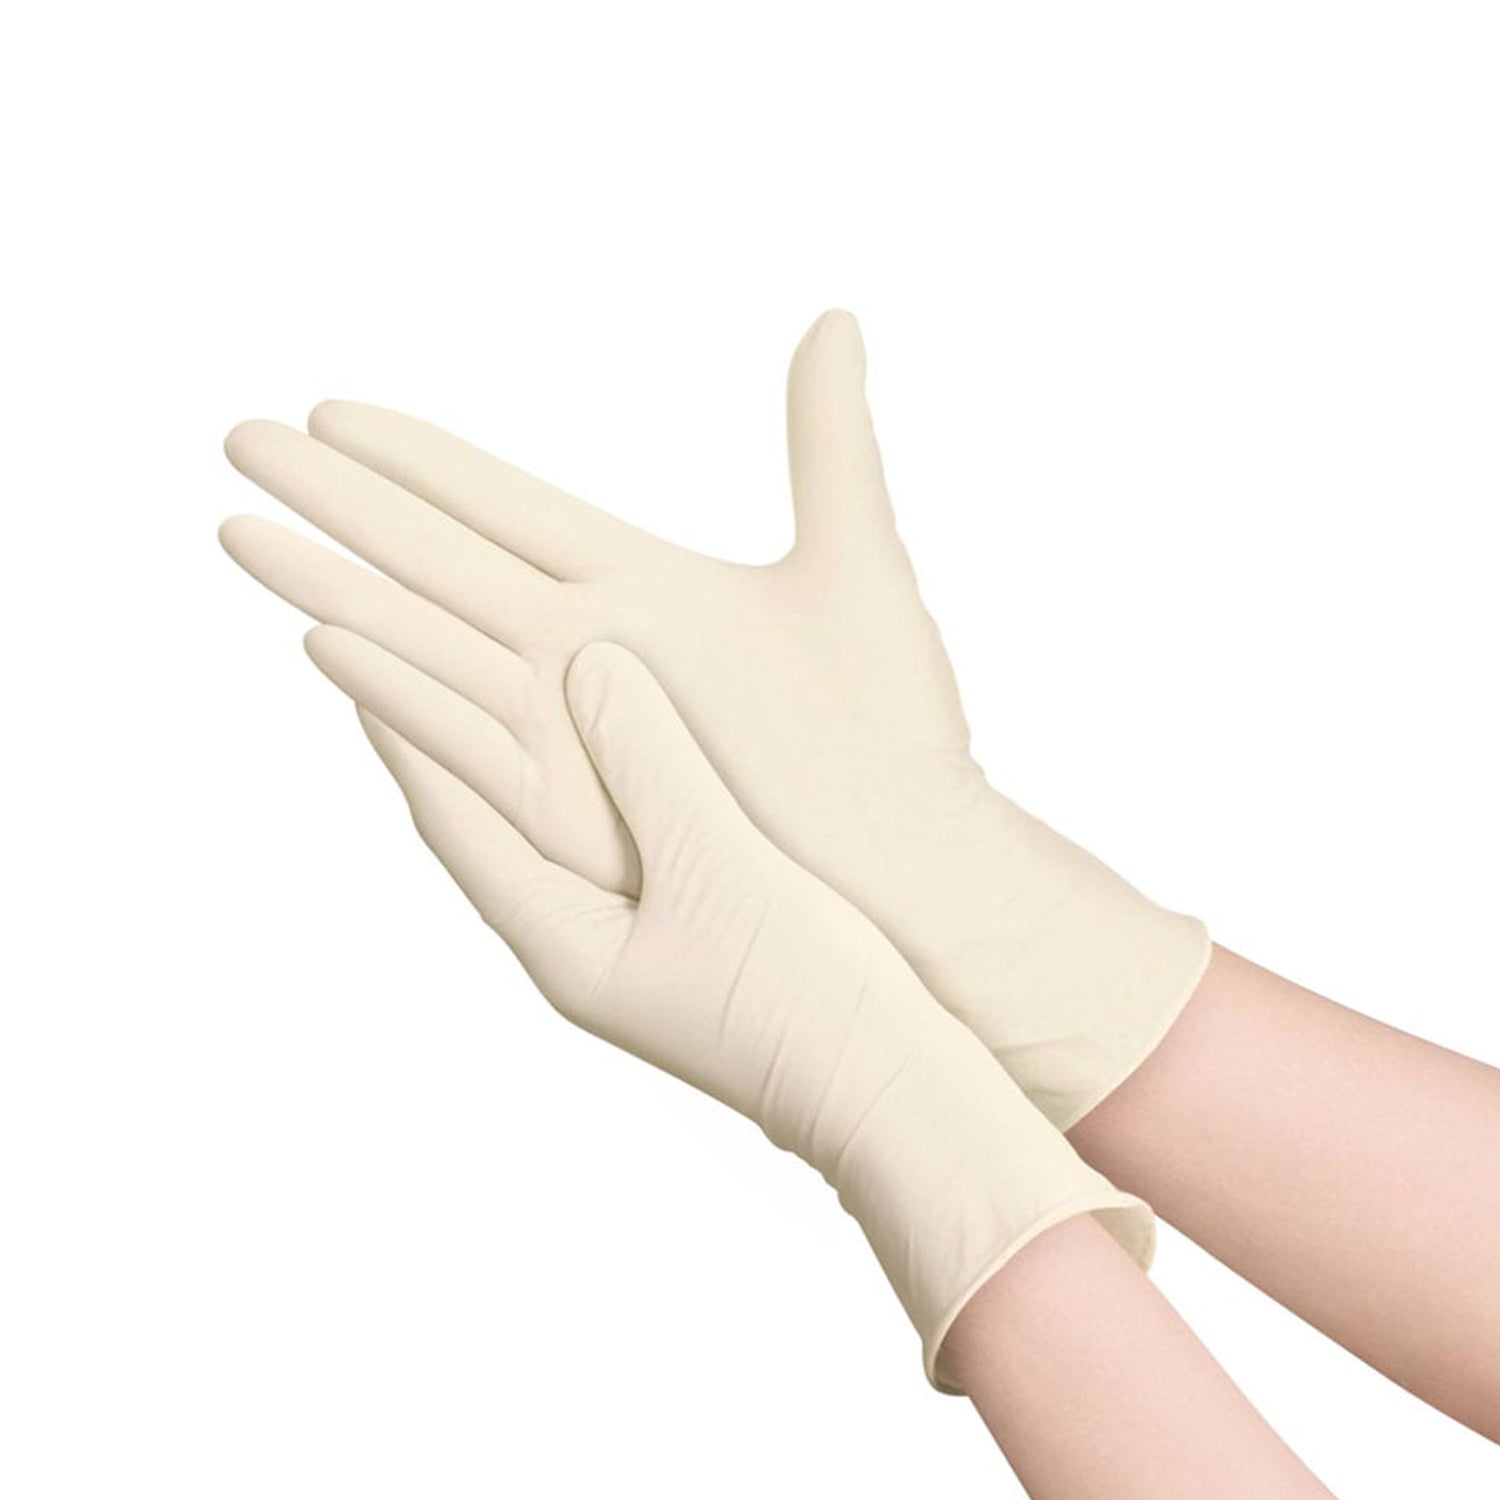 Premier Latex Sterile Powder Free Gloves | Small | Pack of 50 pairs (2)